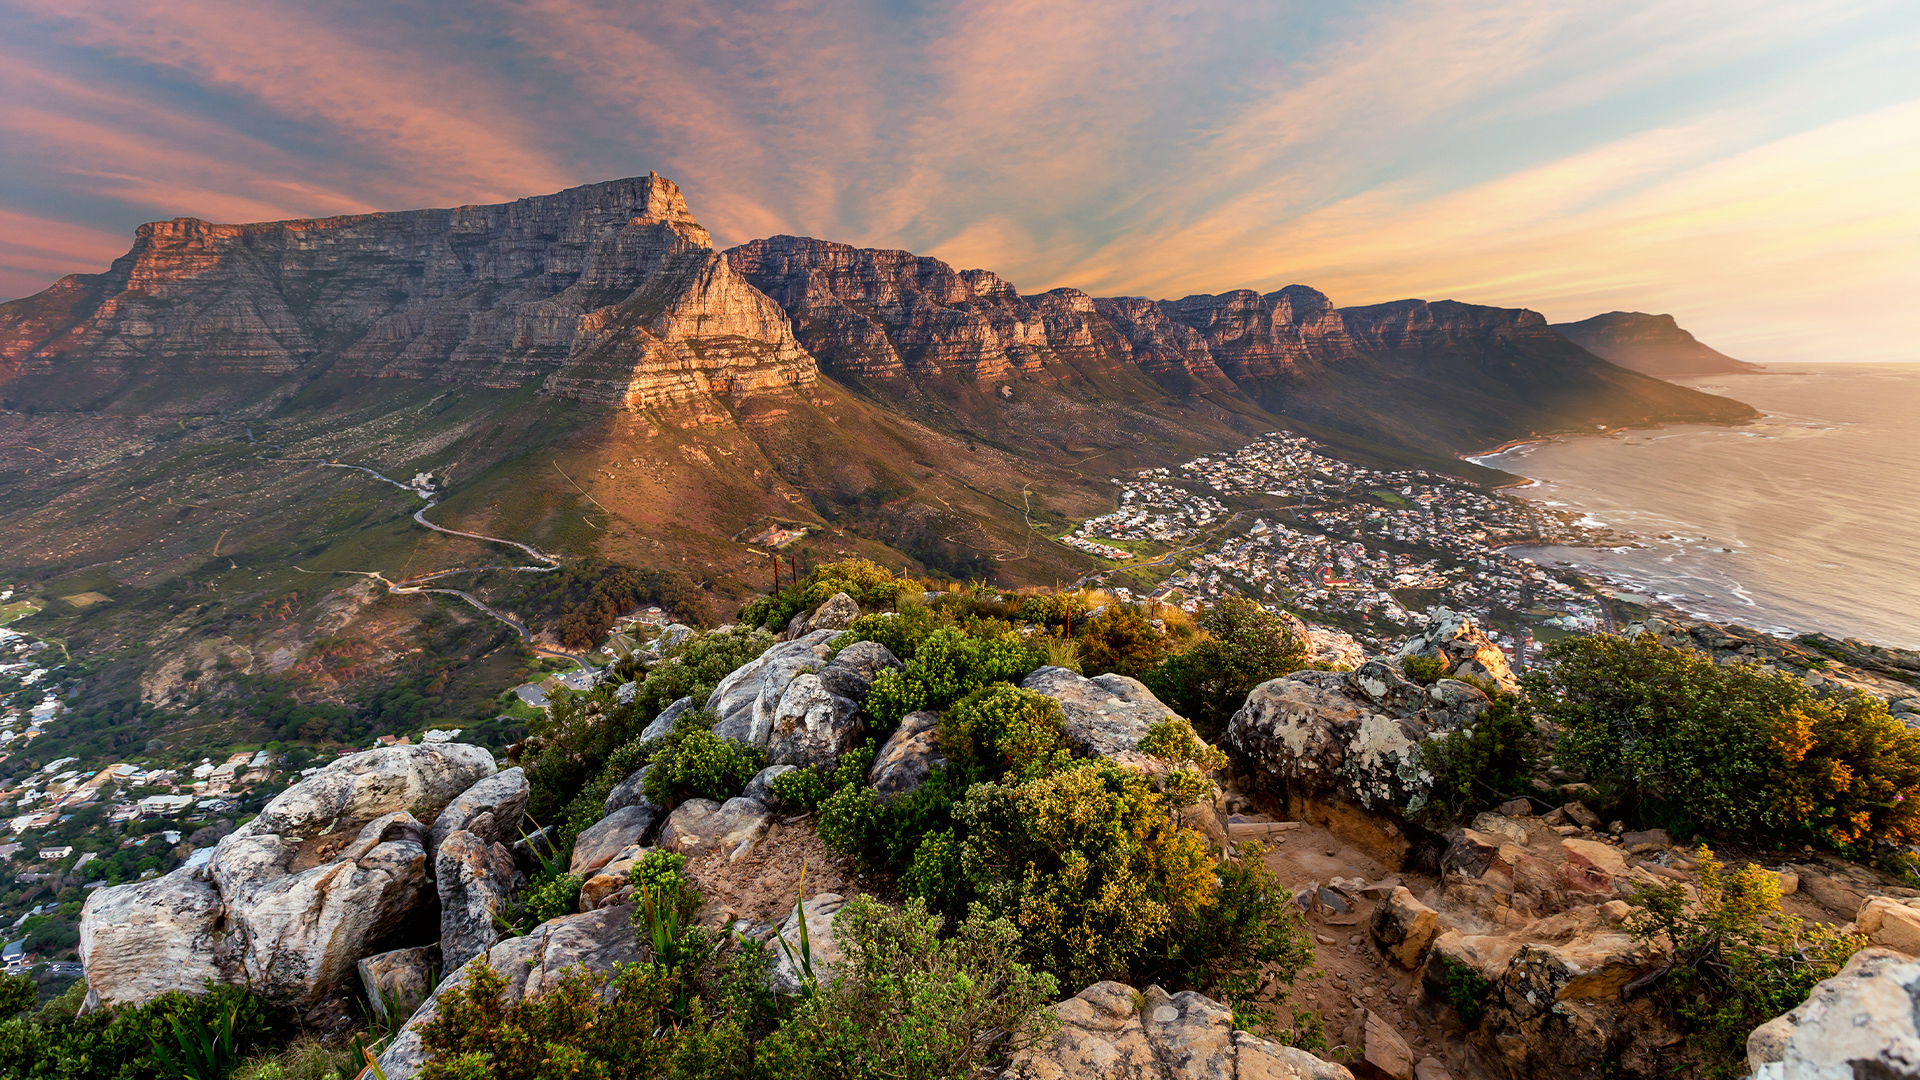 Destinations: Table Mountain at sunset in South Africa, Africa